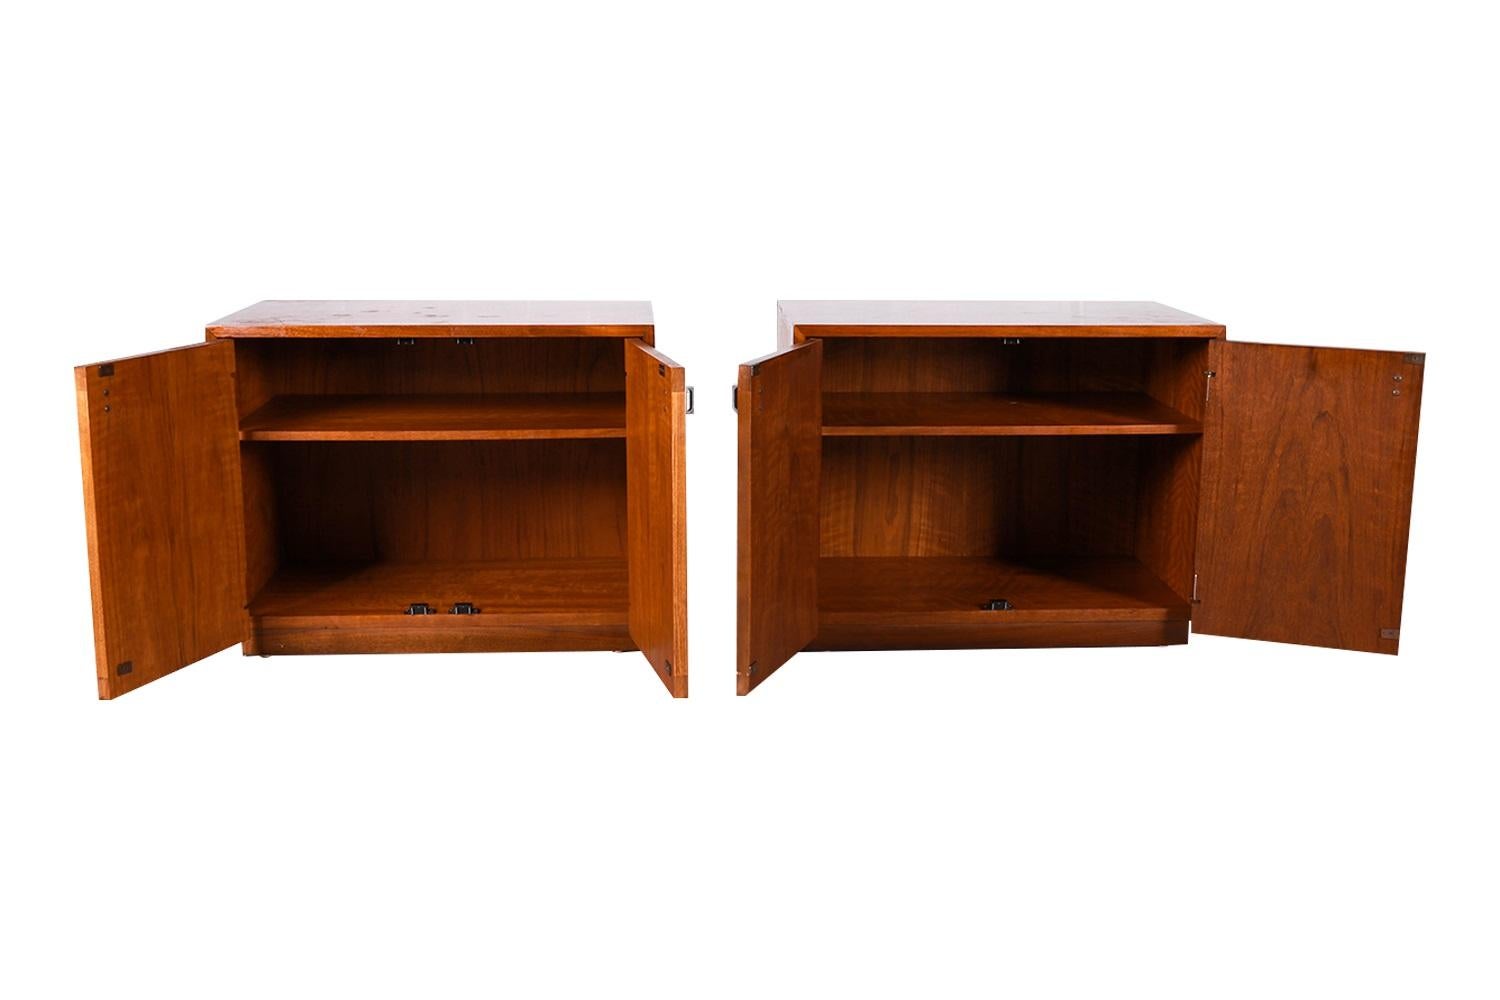 Handsome, richly grained walnut Mid-Century Modern nightstands or end tables, attributed to Jack Cartwright for Founders Furniture Company. USA circa 1970’s. Expertly crafted, these absolute jewels remain in clean vintage condition. Each features a